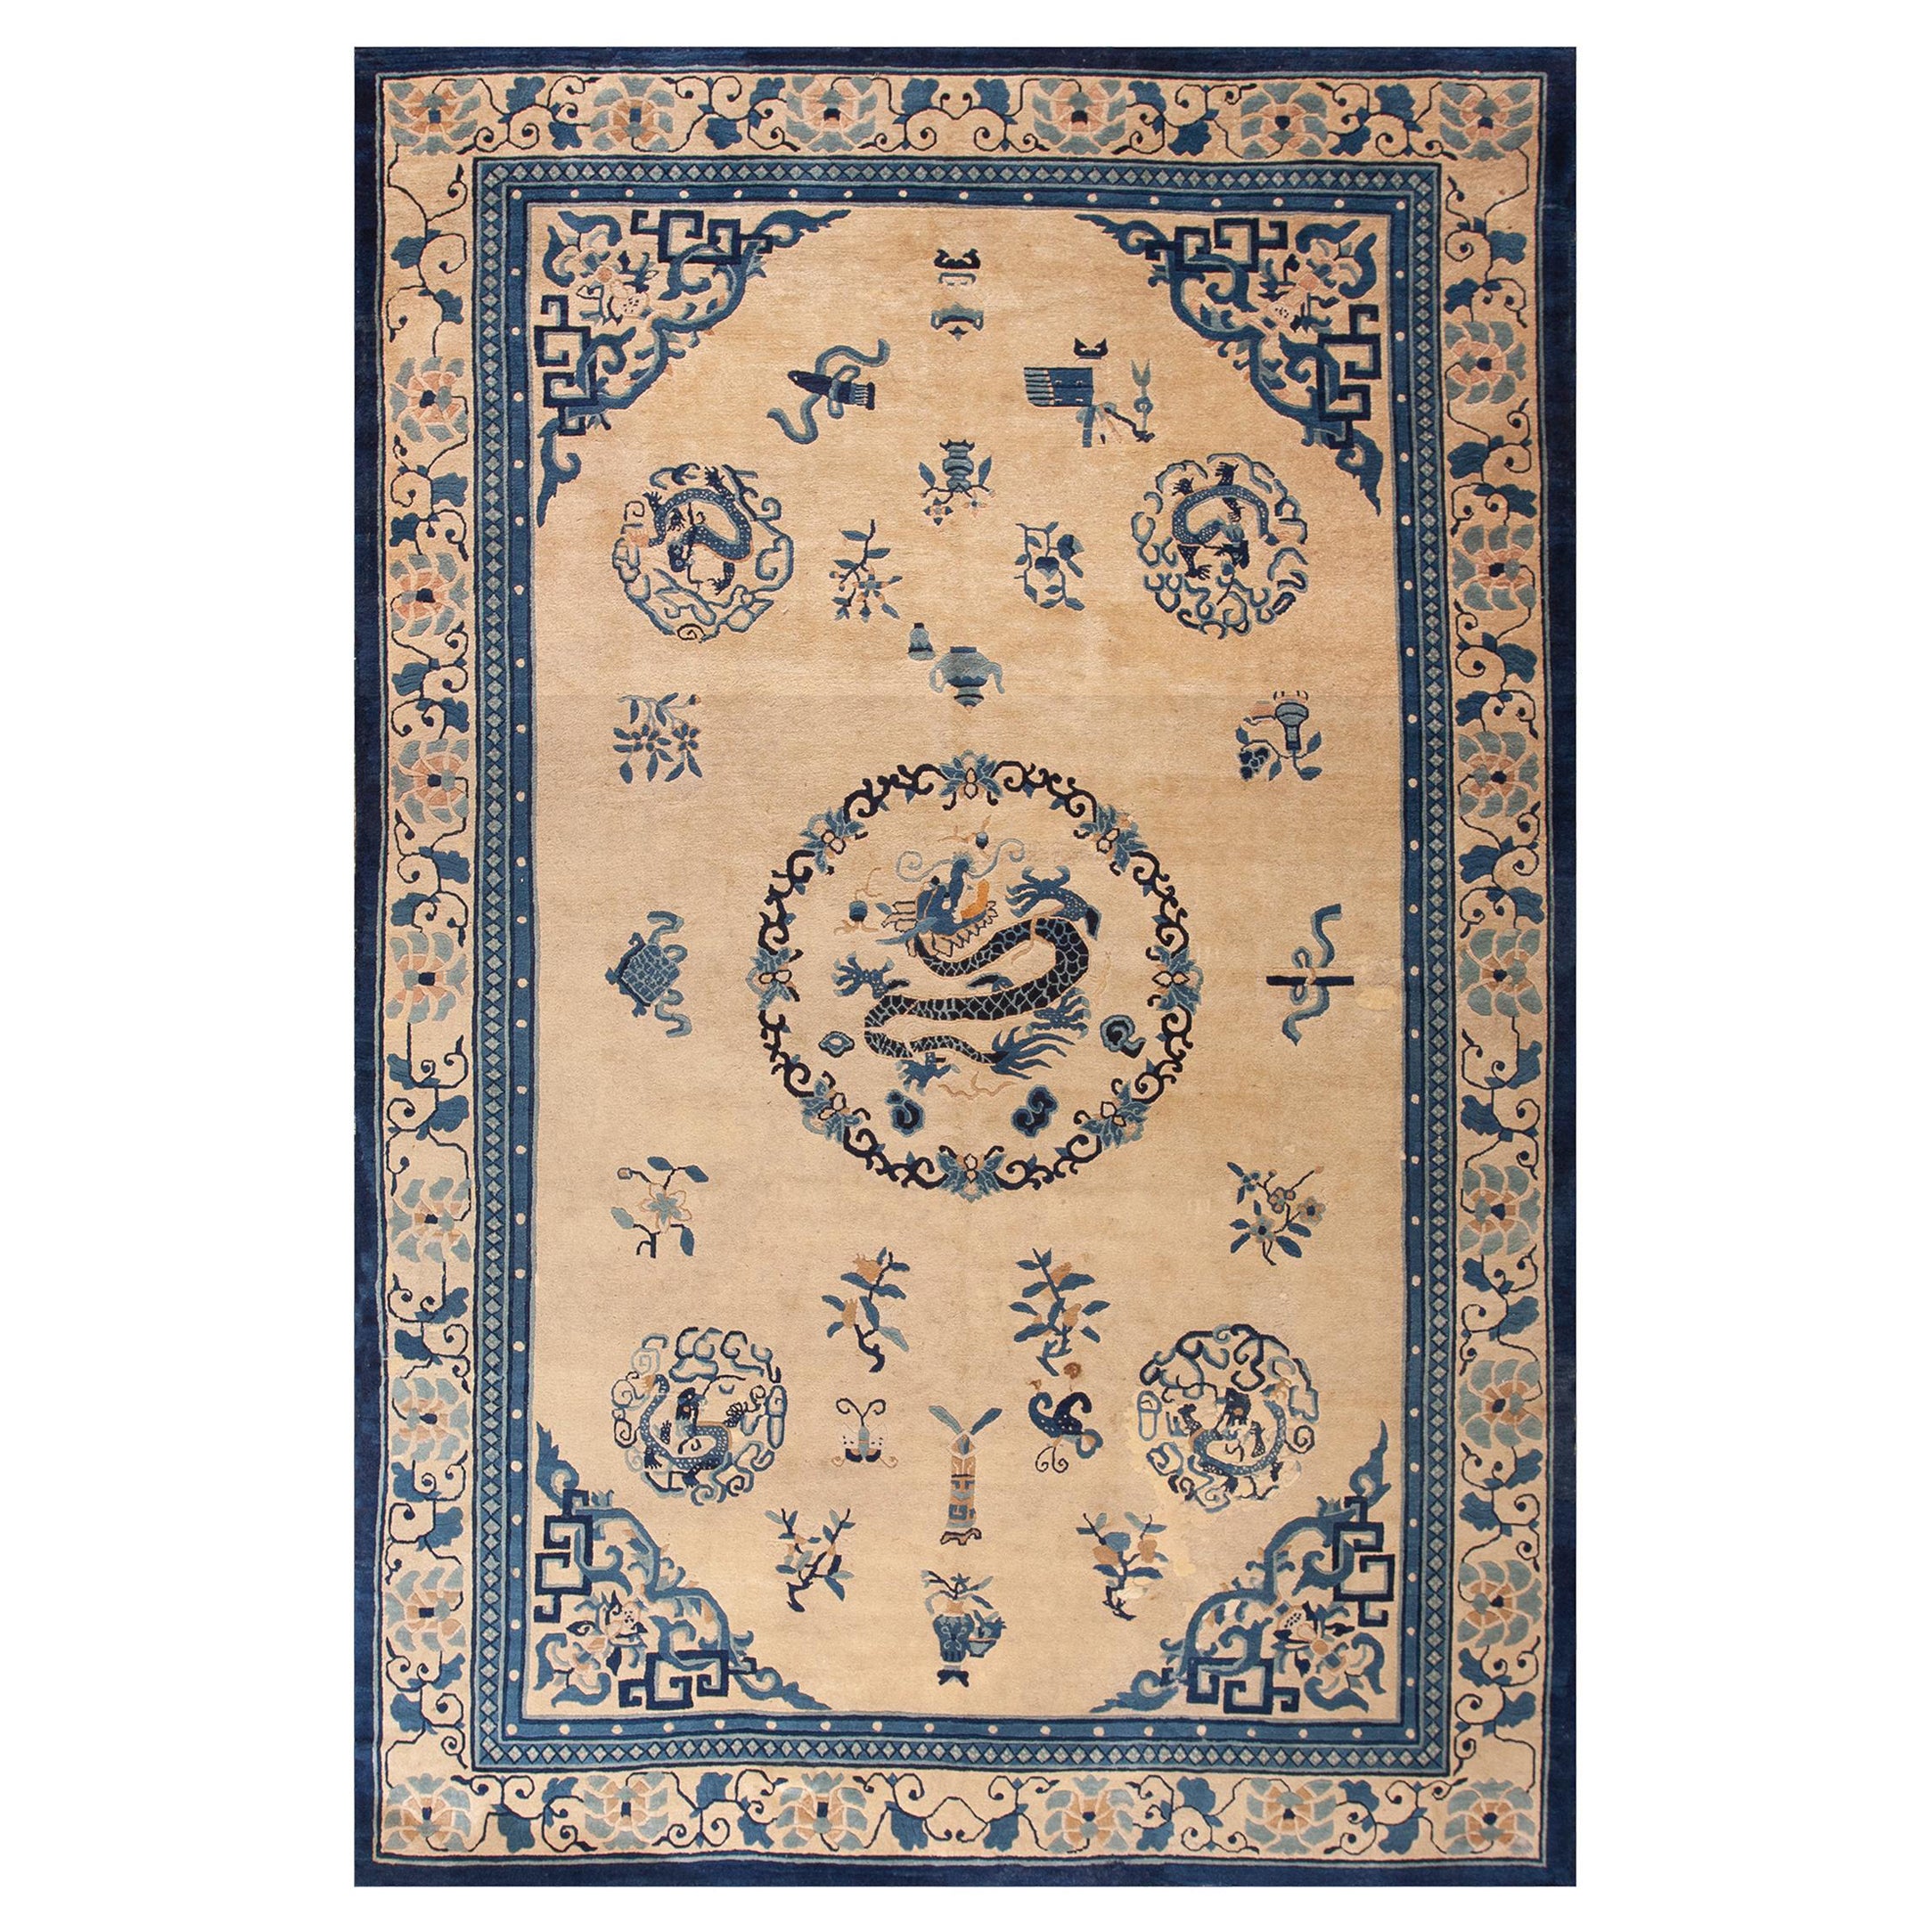 Late 19th Century Chinese Peking Dragon Carpet ( 8' x 12' - 245 x 365 ) For Sale